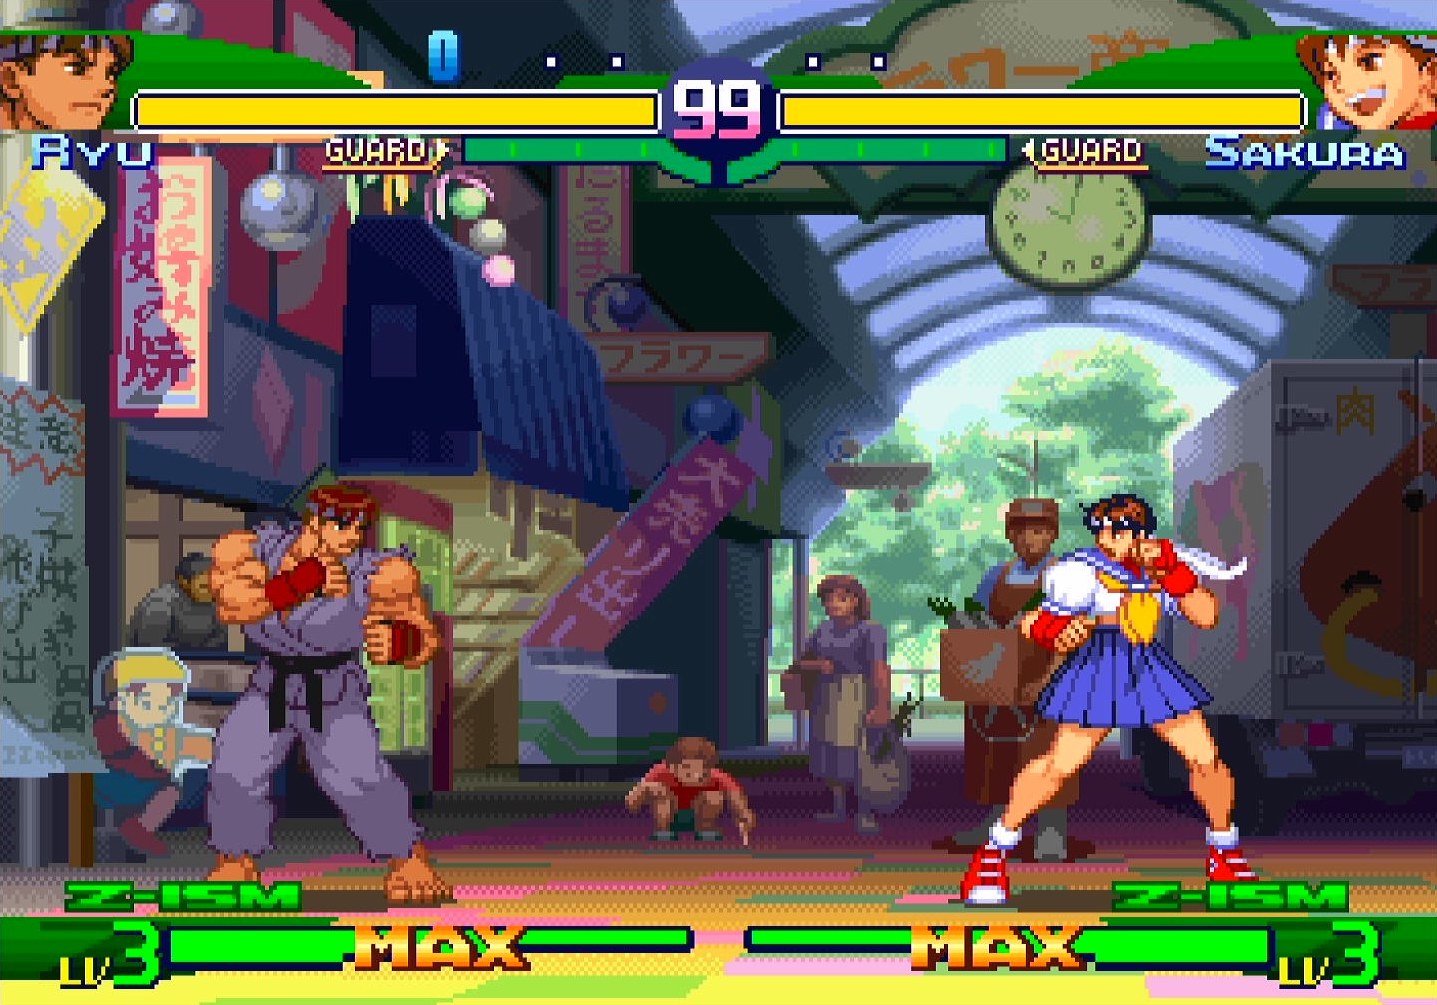 Street Fighter Alpha 3 (Game) - Giant Bomb